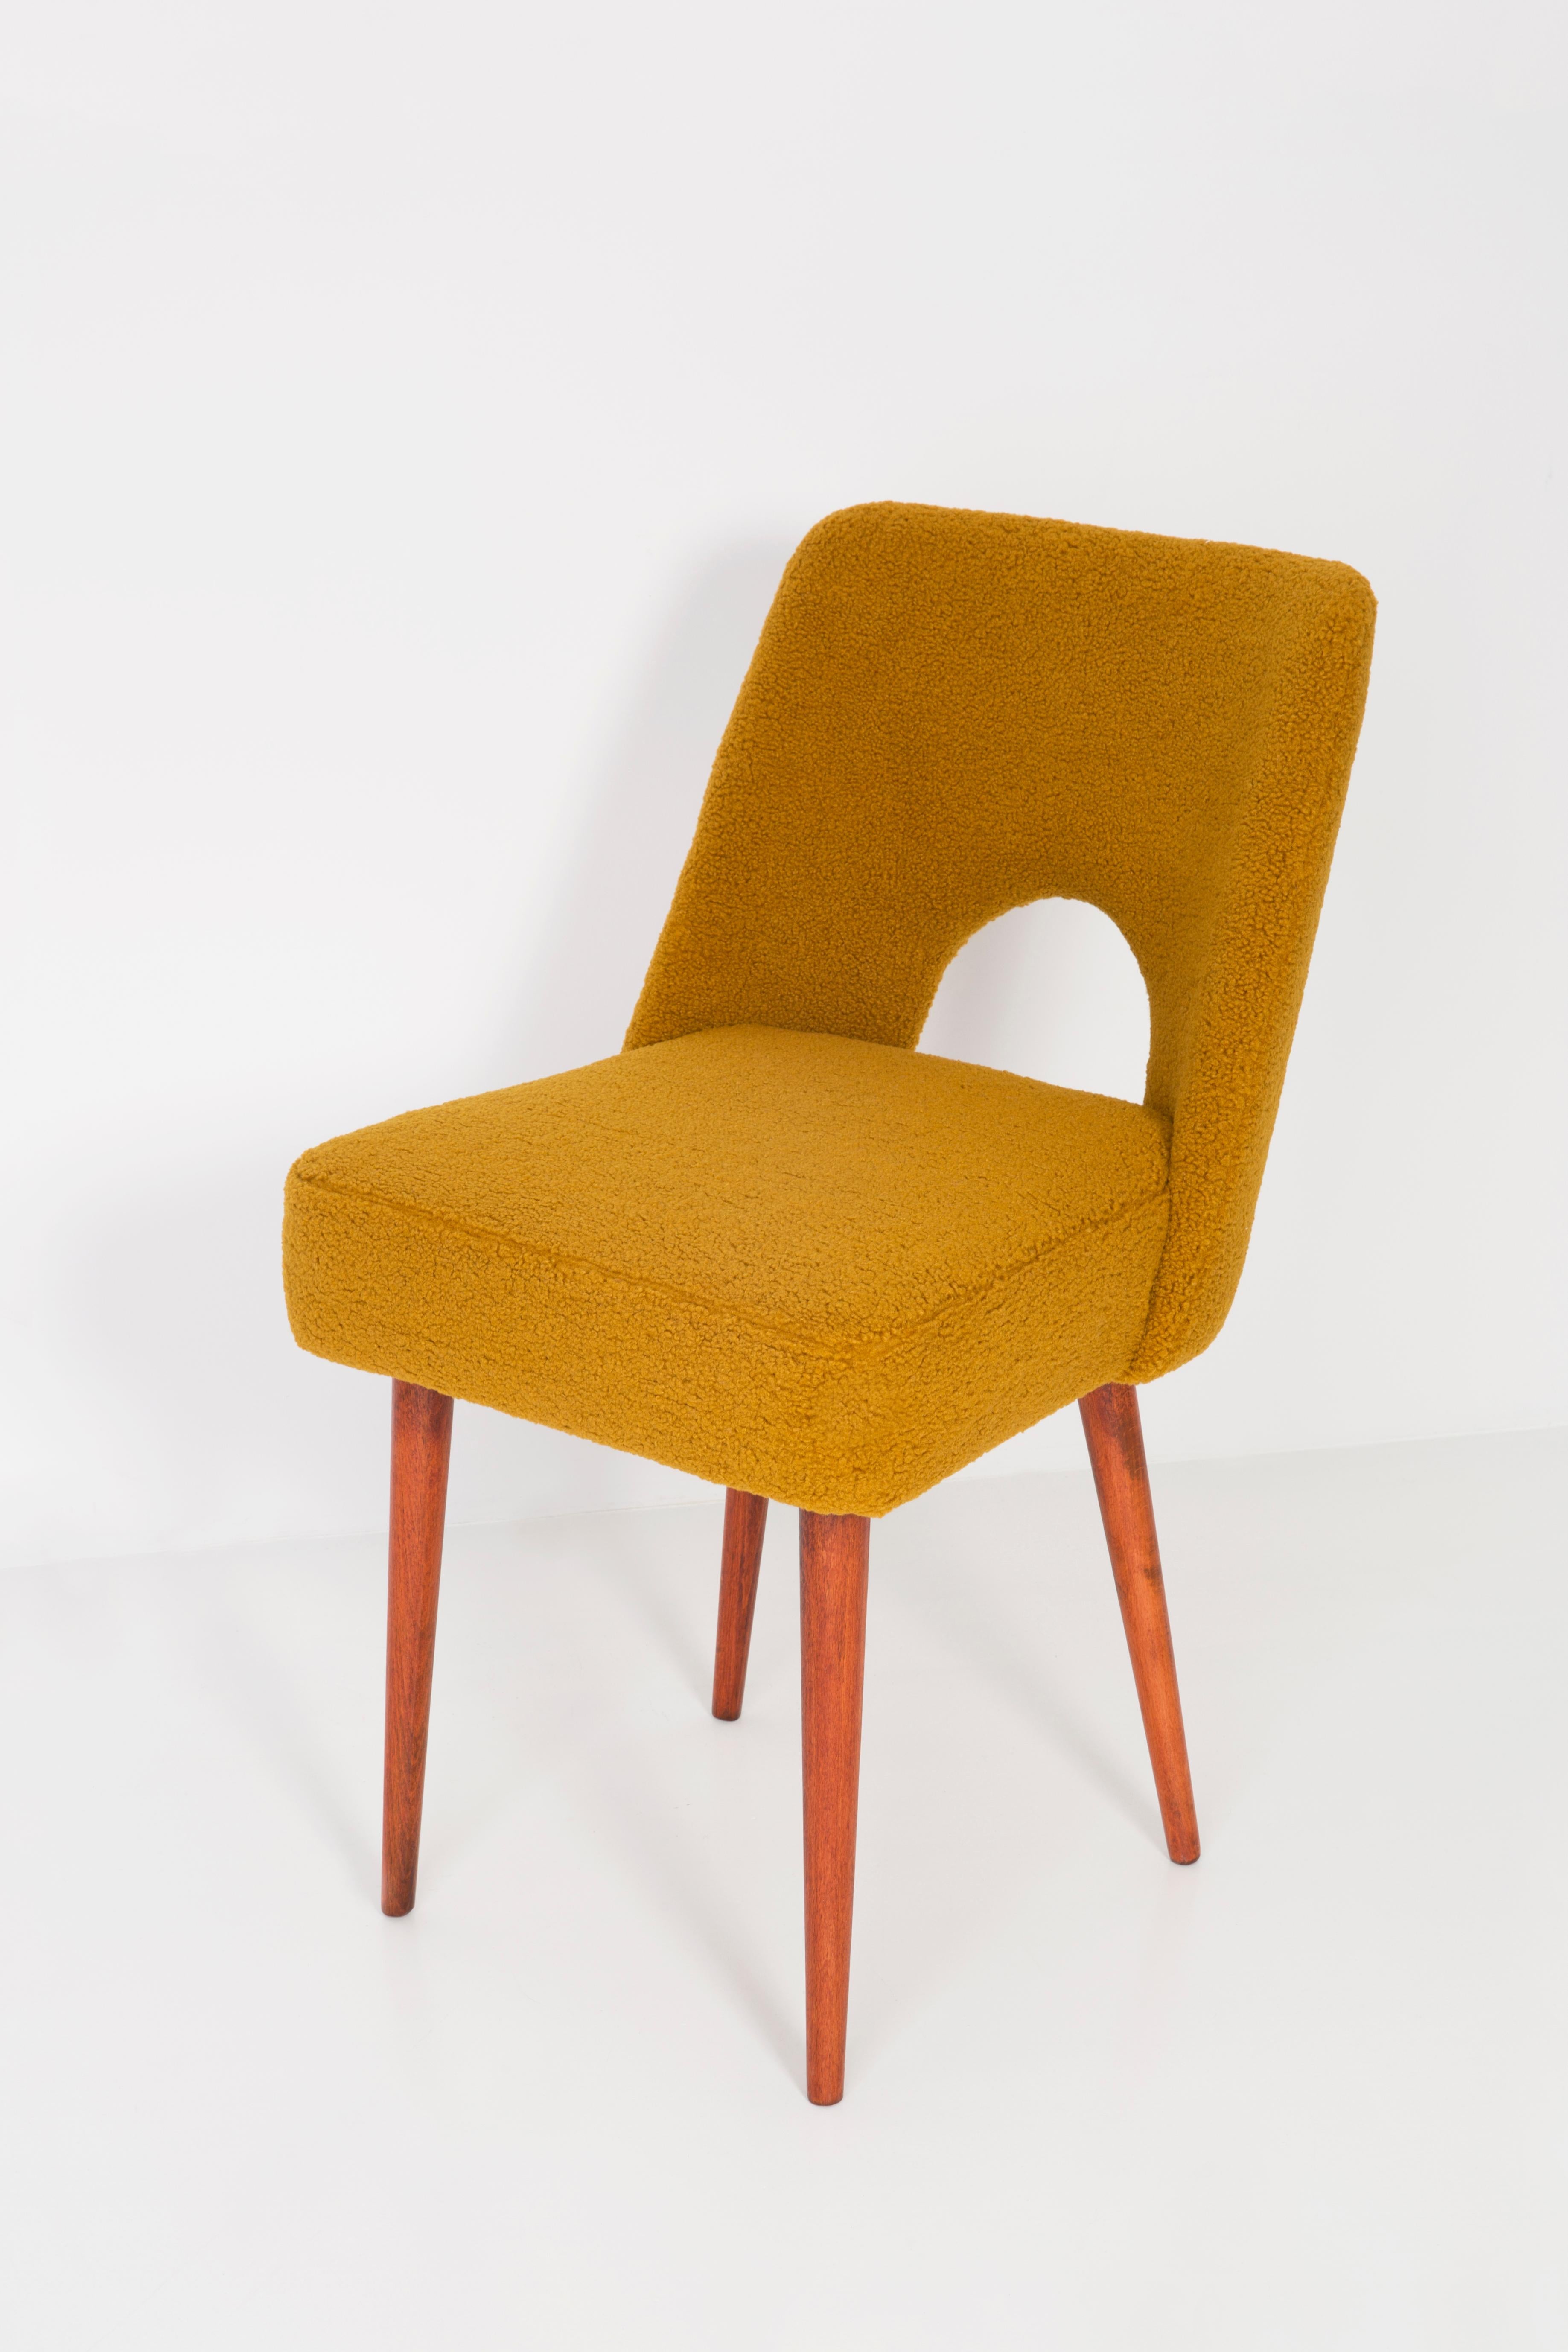 Polish Yellow Ochre Boucle 'Shell' Chair, 1960s For Sale